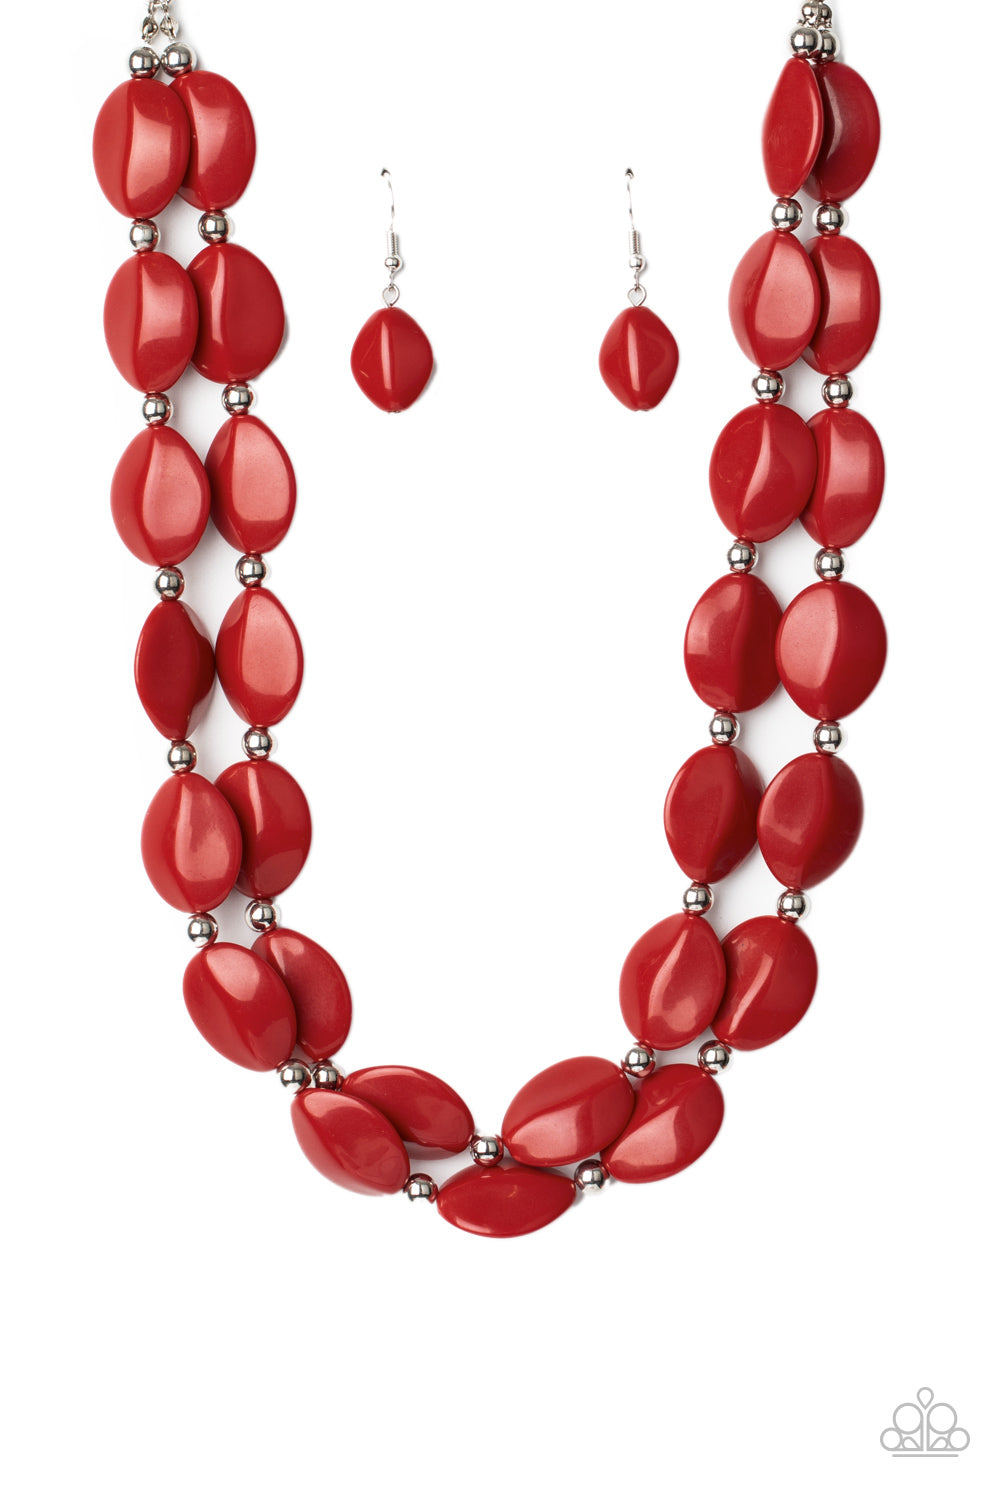 Two-Story Stunner Necklace (Purple, Red)